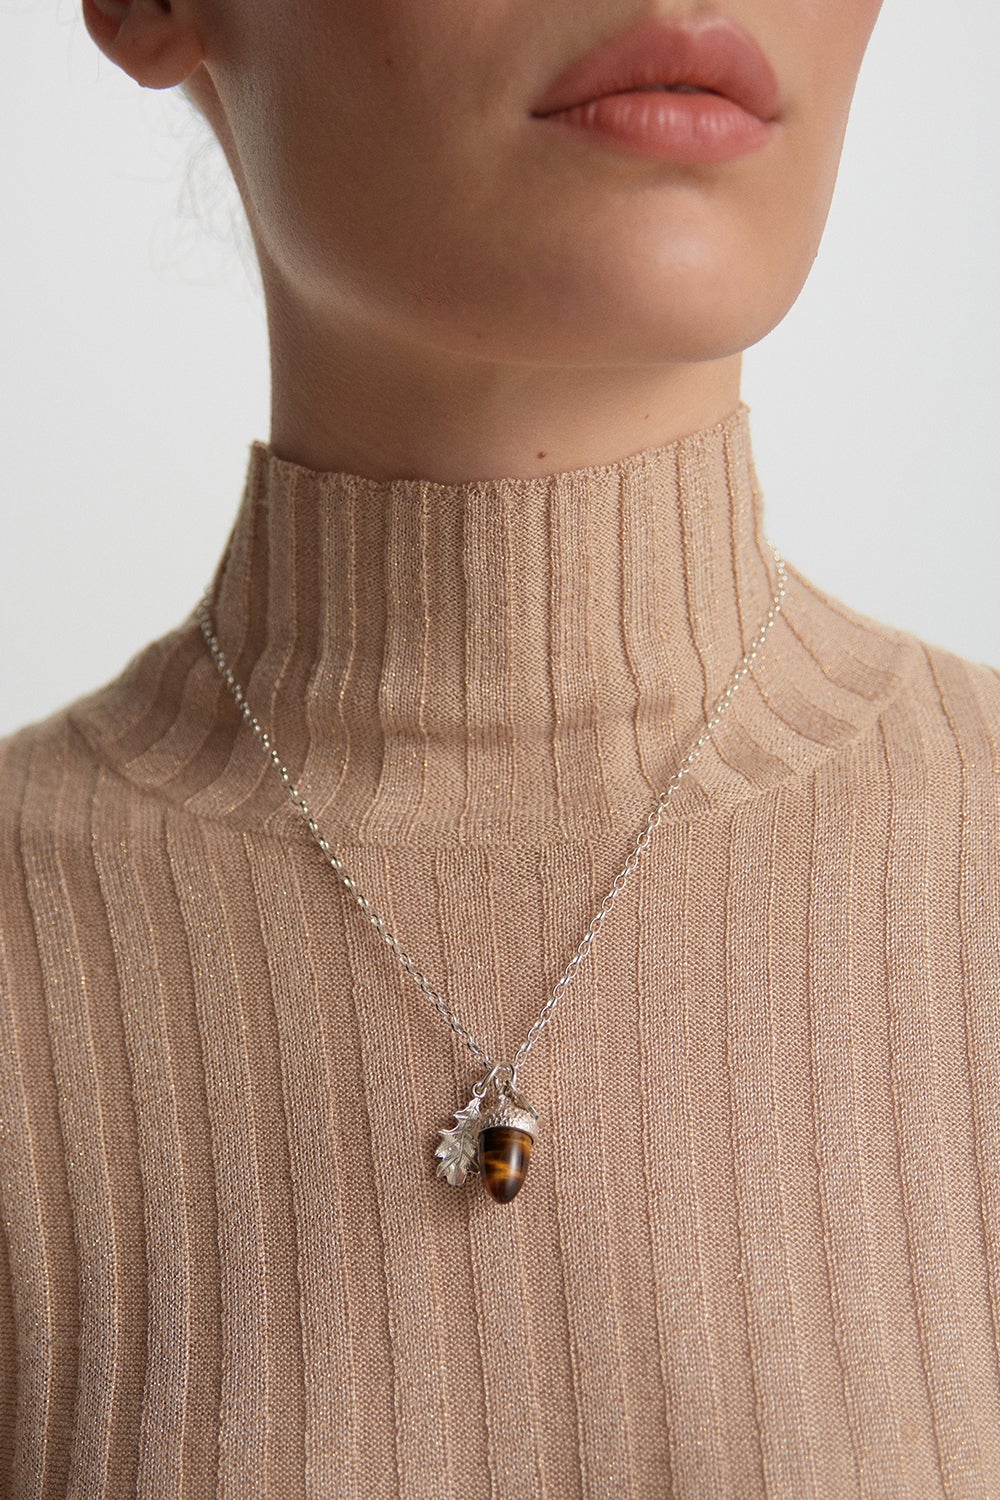 Tiger Eye Necklace for Clear Communication and Decision Making